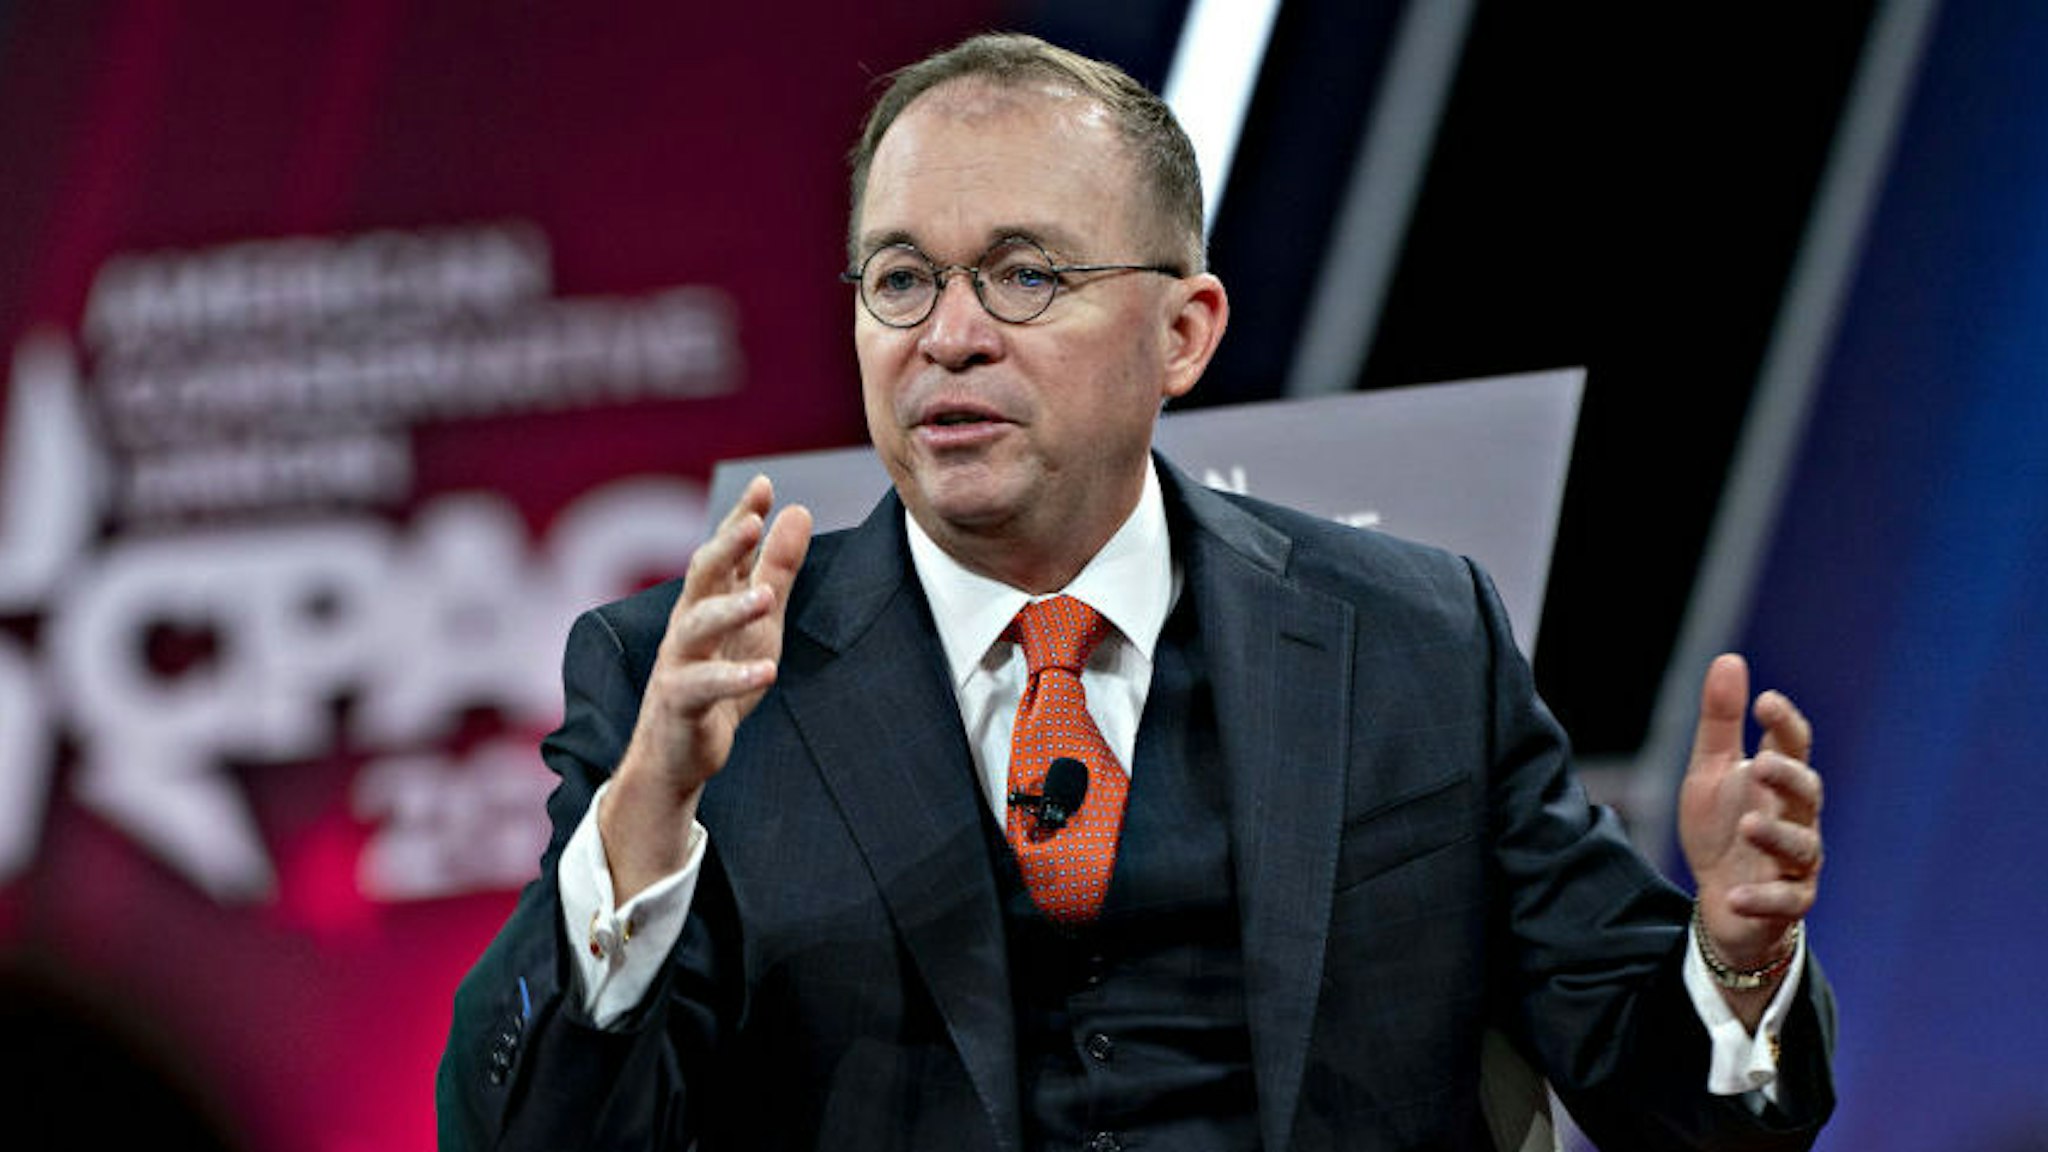 Mick Mulvaney, acting White House chief of staff, speaks during a discussion at the Conservative Political Action Conference (CPAC) in National Harbor, Maryland, U.S., on Friday, Feb. 28, 2020. President Trump will address this years CPAC after seeking to close ranks within his administration about the threat posed by the coronavirus and how the U.S. government plans to stop its spread following mixed messages that rattled Wall Street. Photographer: Andrew Harrer/Bloomberg